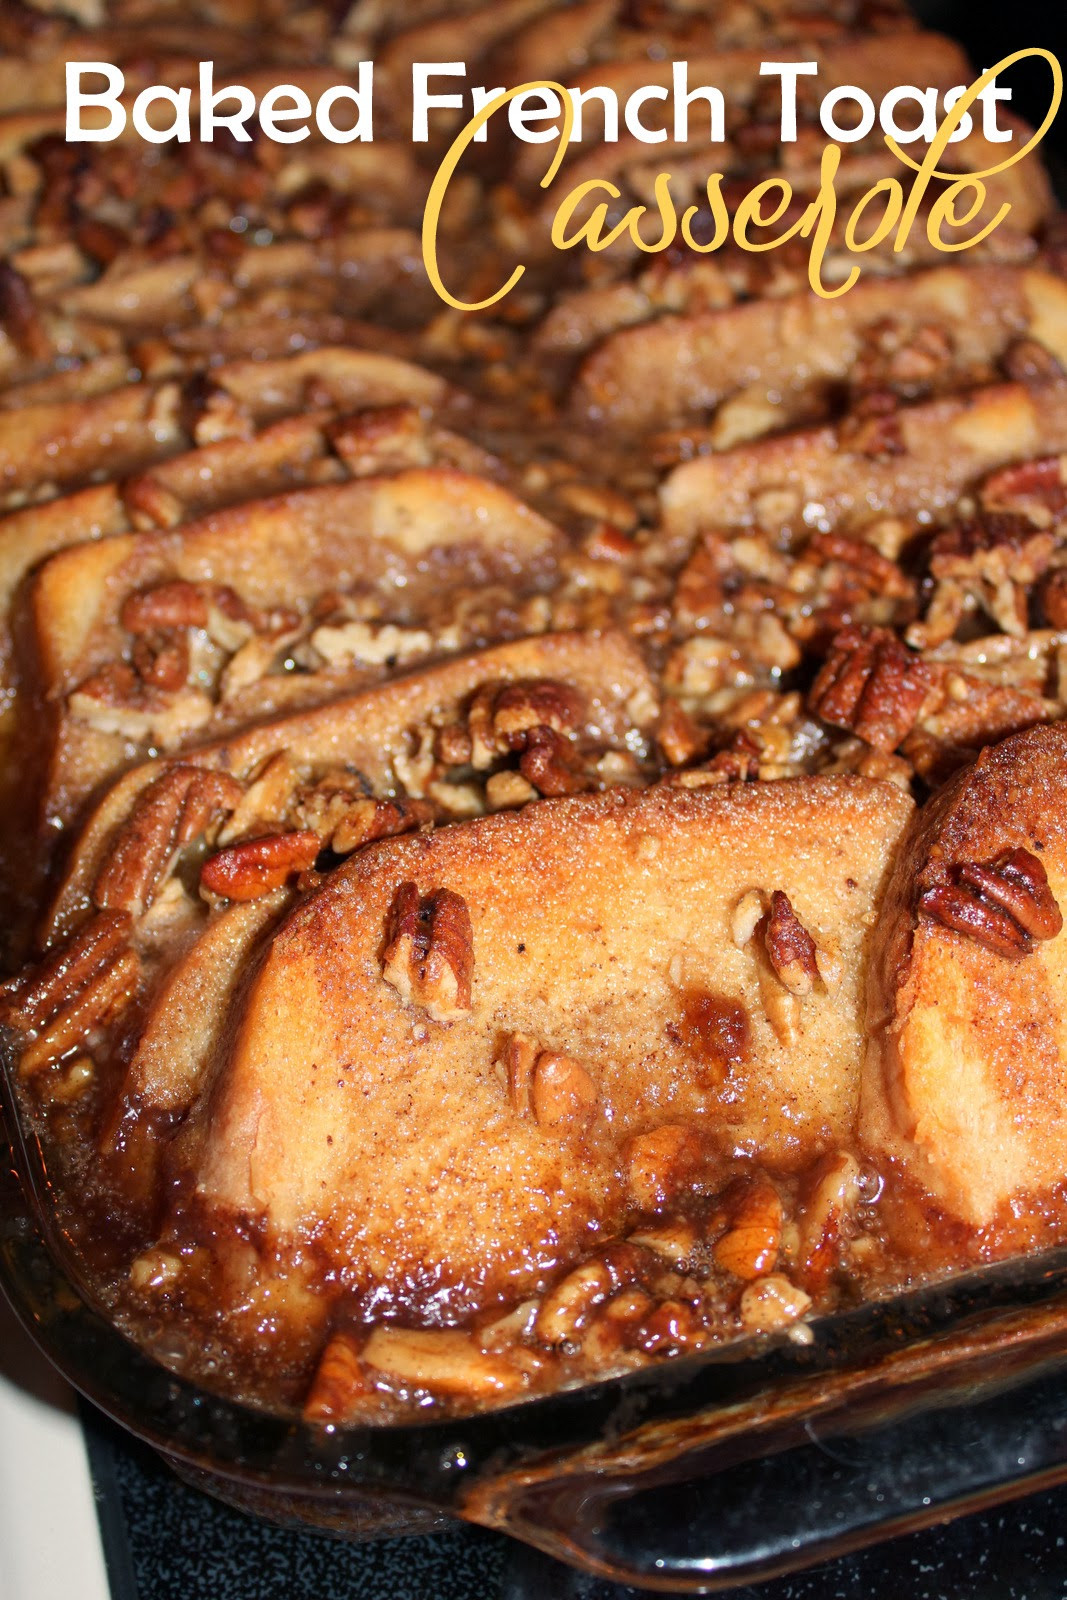 Baked French Toast Casserole Recipe
 Harris Sisters GirlTalk Paula Deen s Baked French Toast